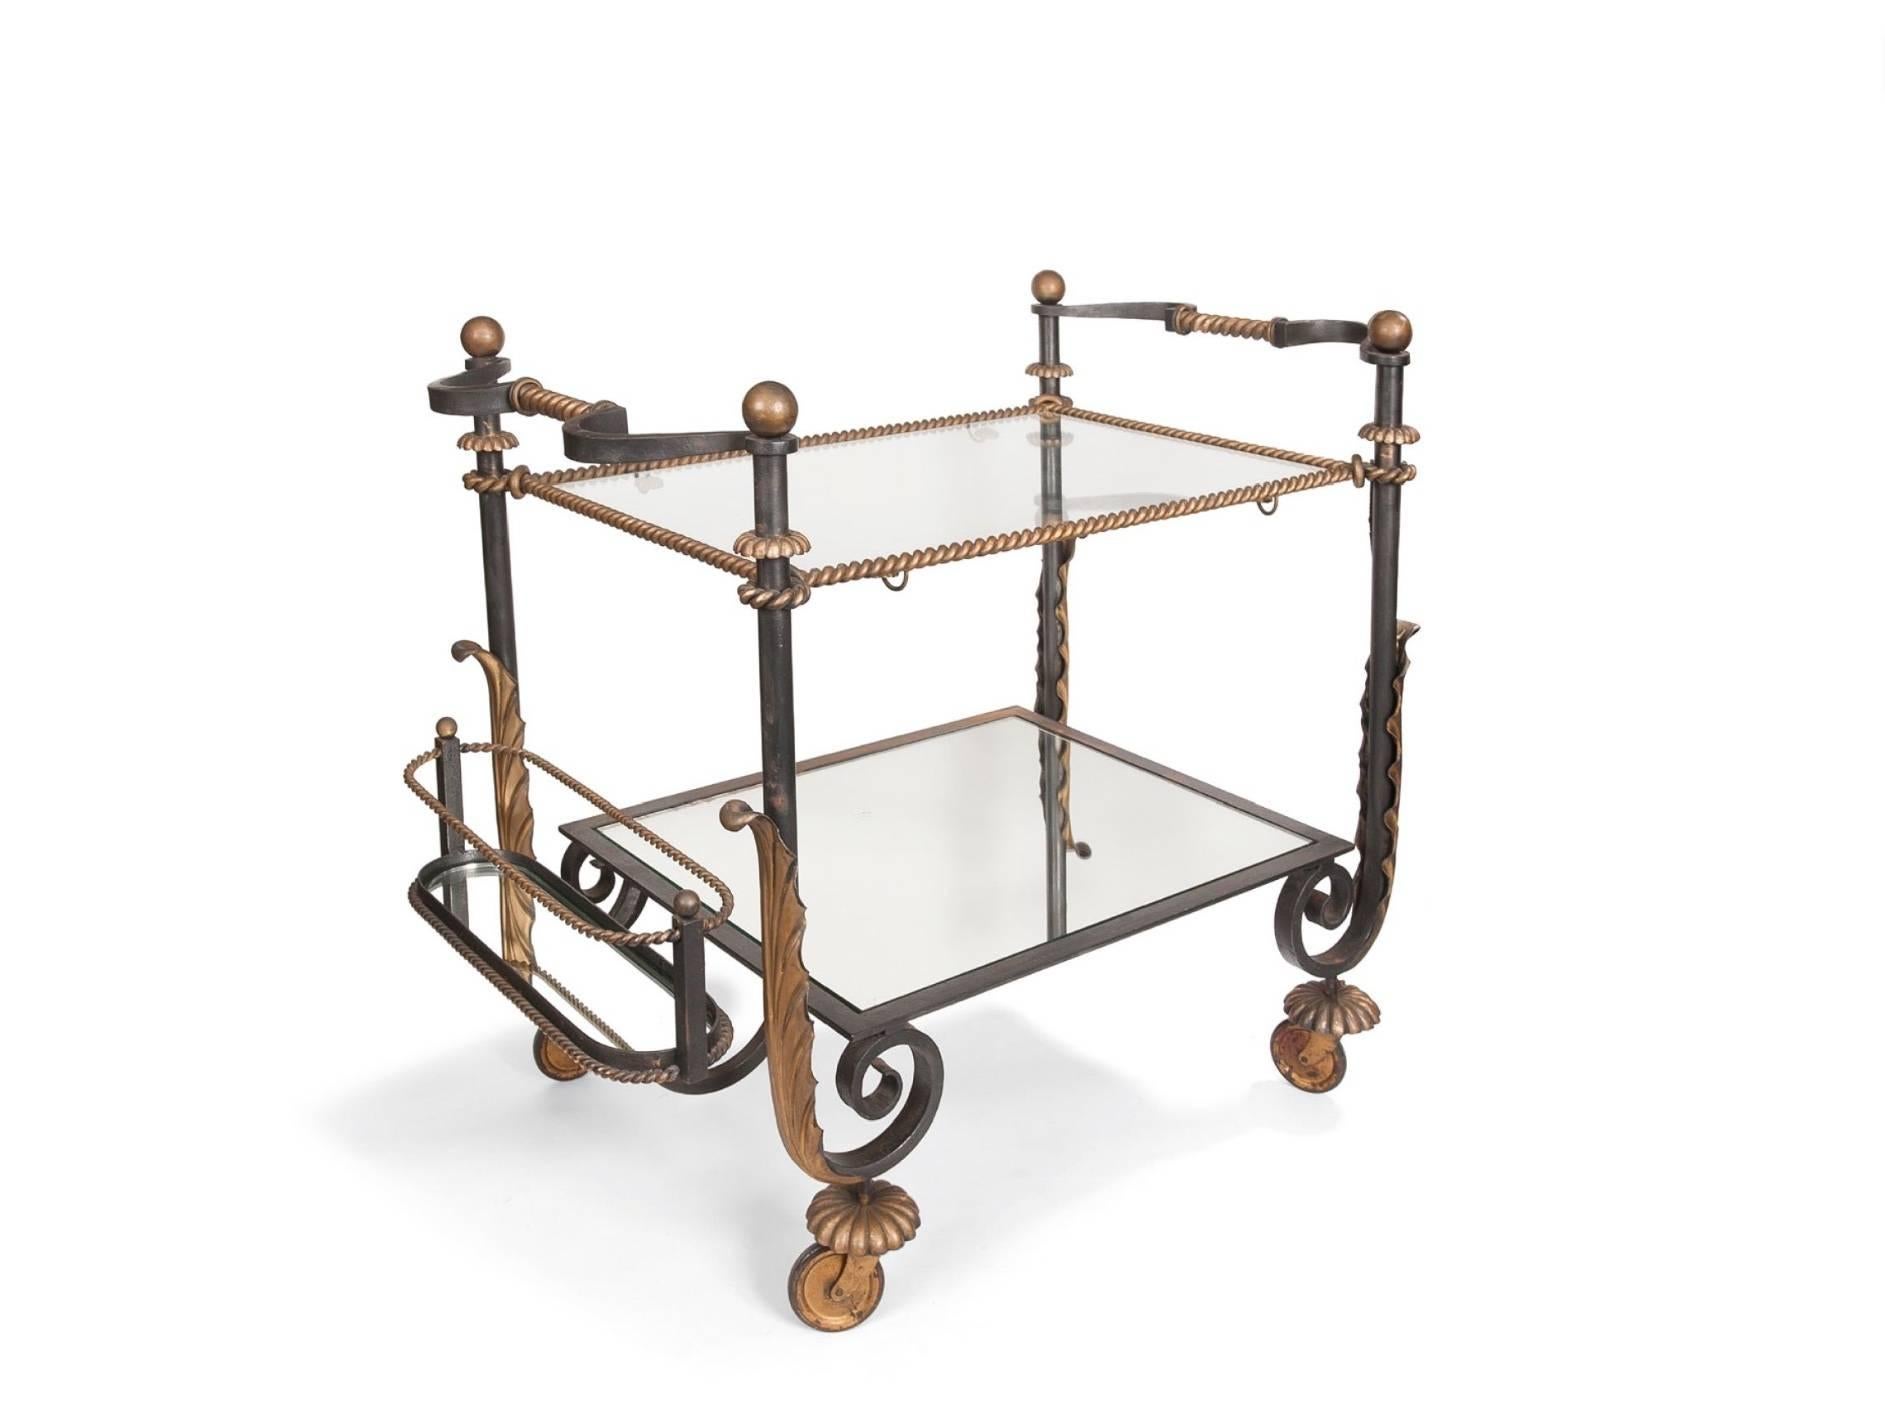 In wrought and gold iron, rectangular shape with two glass plates, the upper plate girded with a golden cord, the plates connected by four tubular uprights ending in spirals outlined by a large gold acanthus leaf, on four wheels topped by a golden